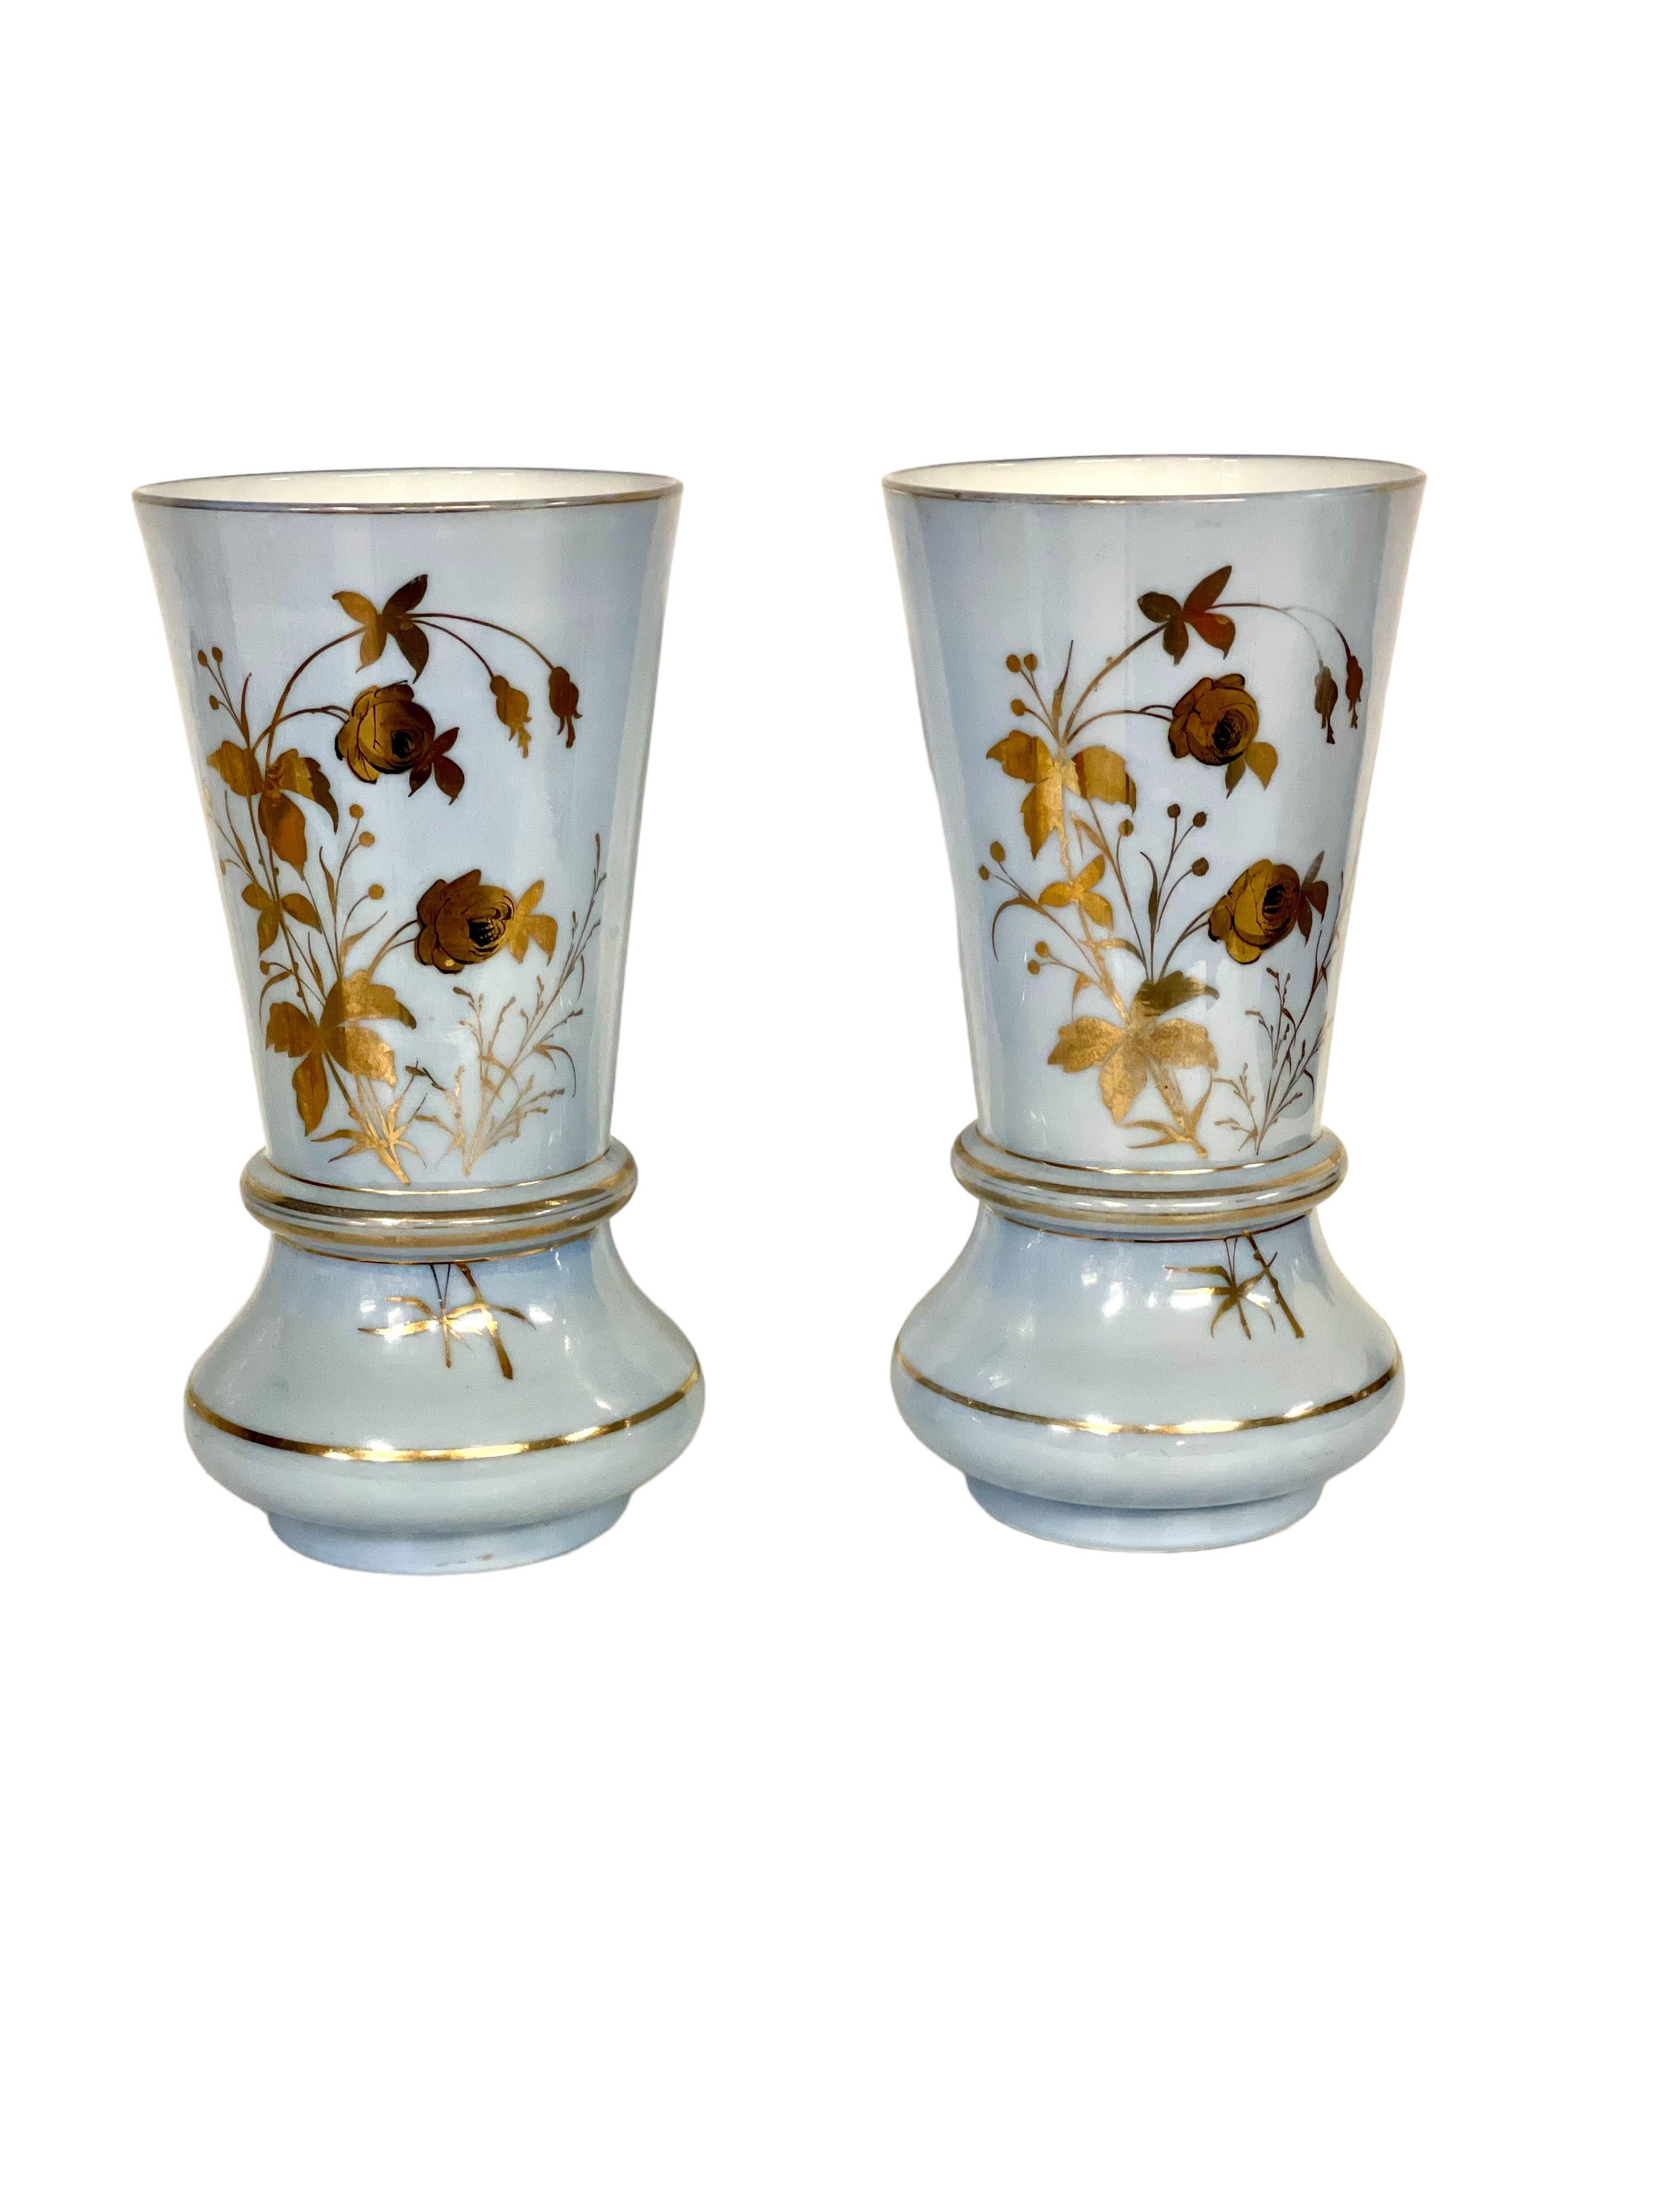 Pair of Large Gilt and Pale Blue Opaline Vases, Napoleon III Period For Sale 1